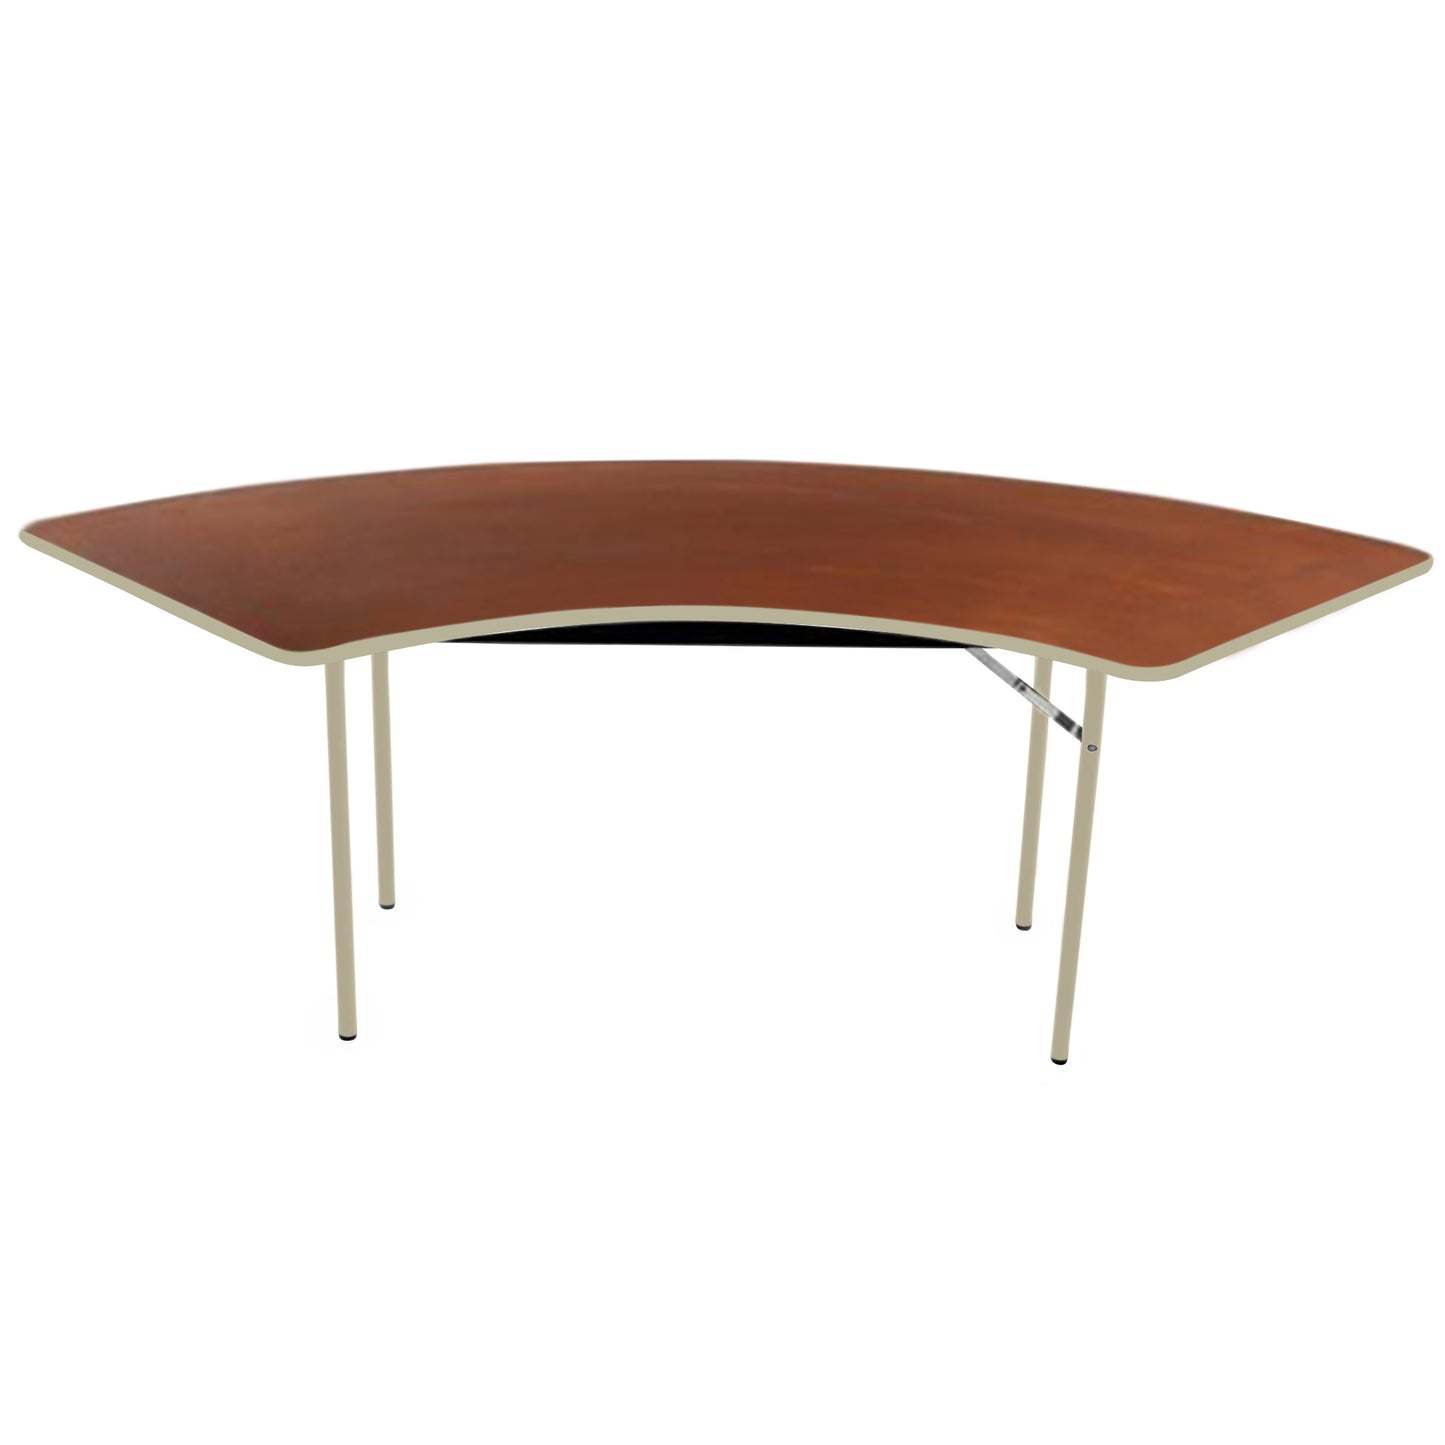 AmTab Folding Table - Plywood Stained and Sealed - Vinyl T-Molding Edge - Serpentine - 30"W x 42,72"L x 29"H  (AmTab AMT-SE306PM)